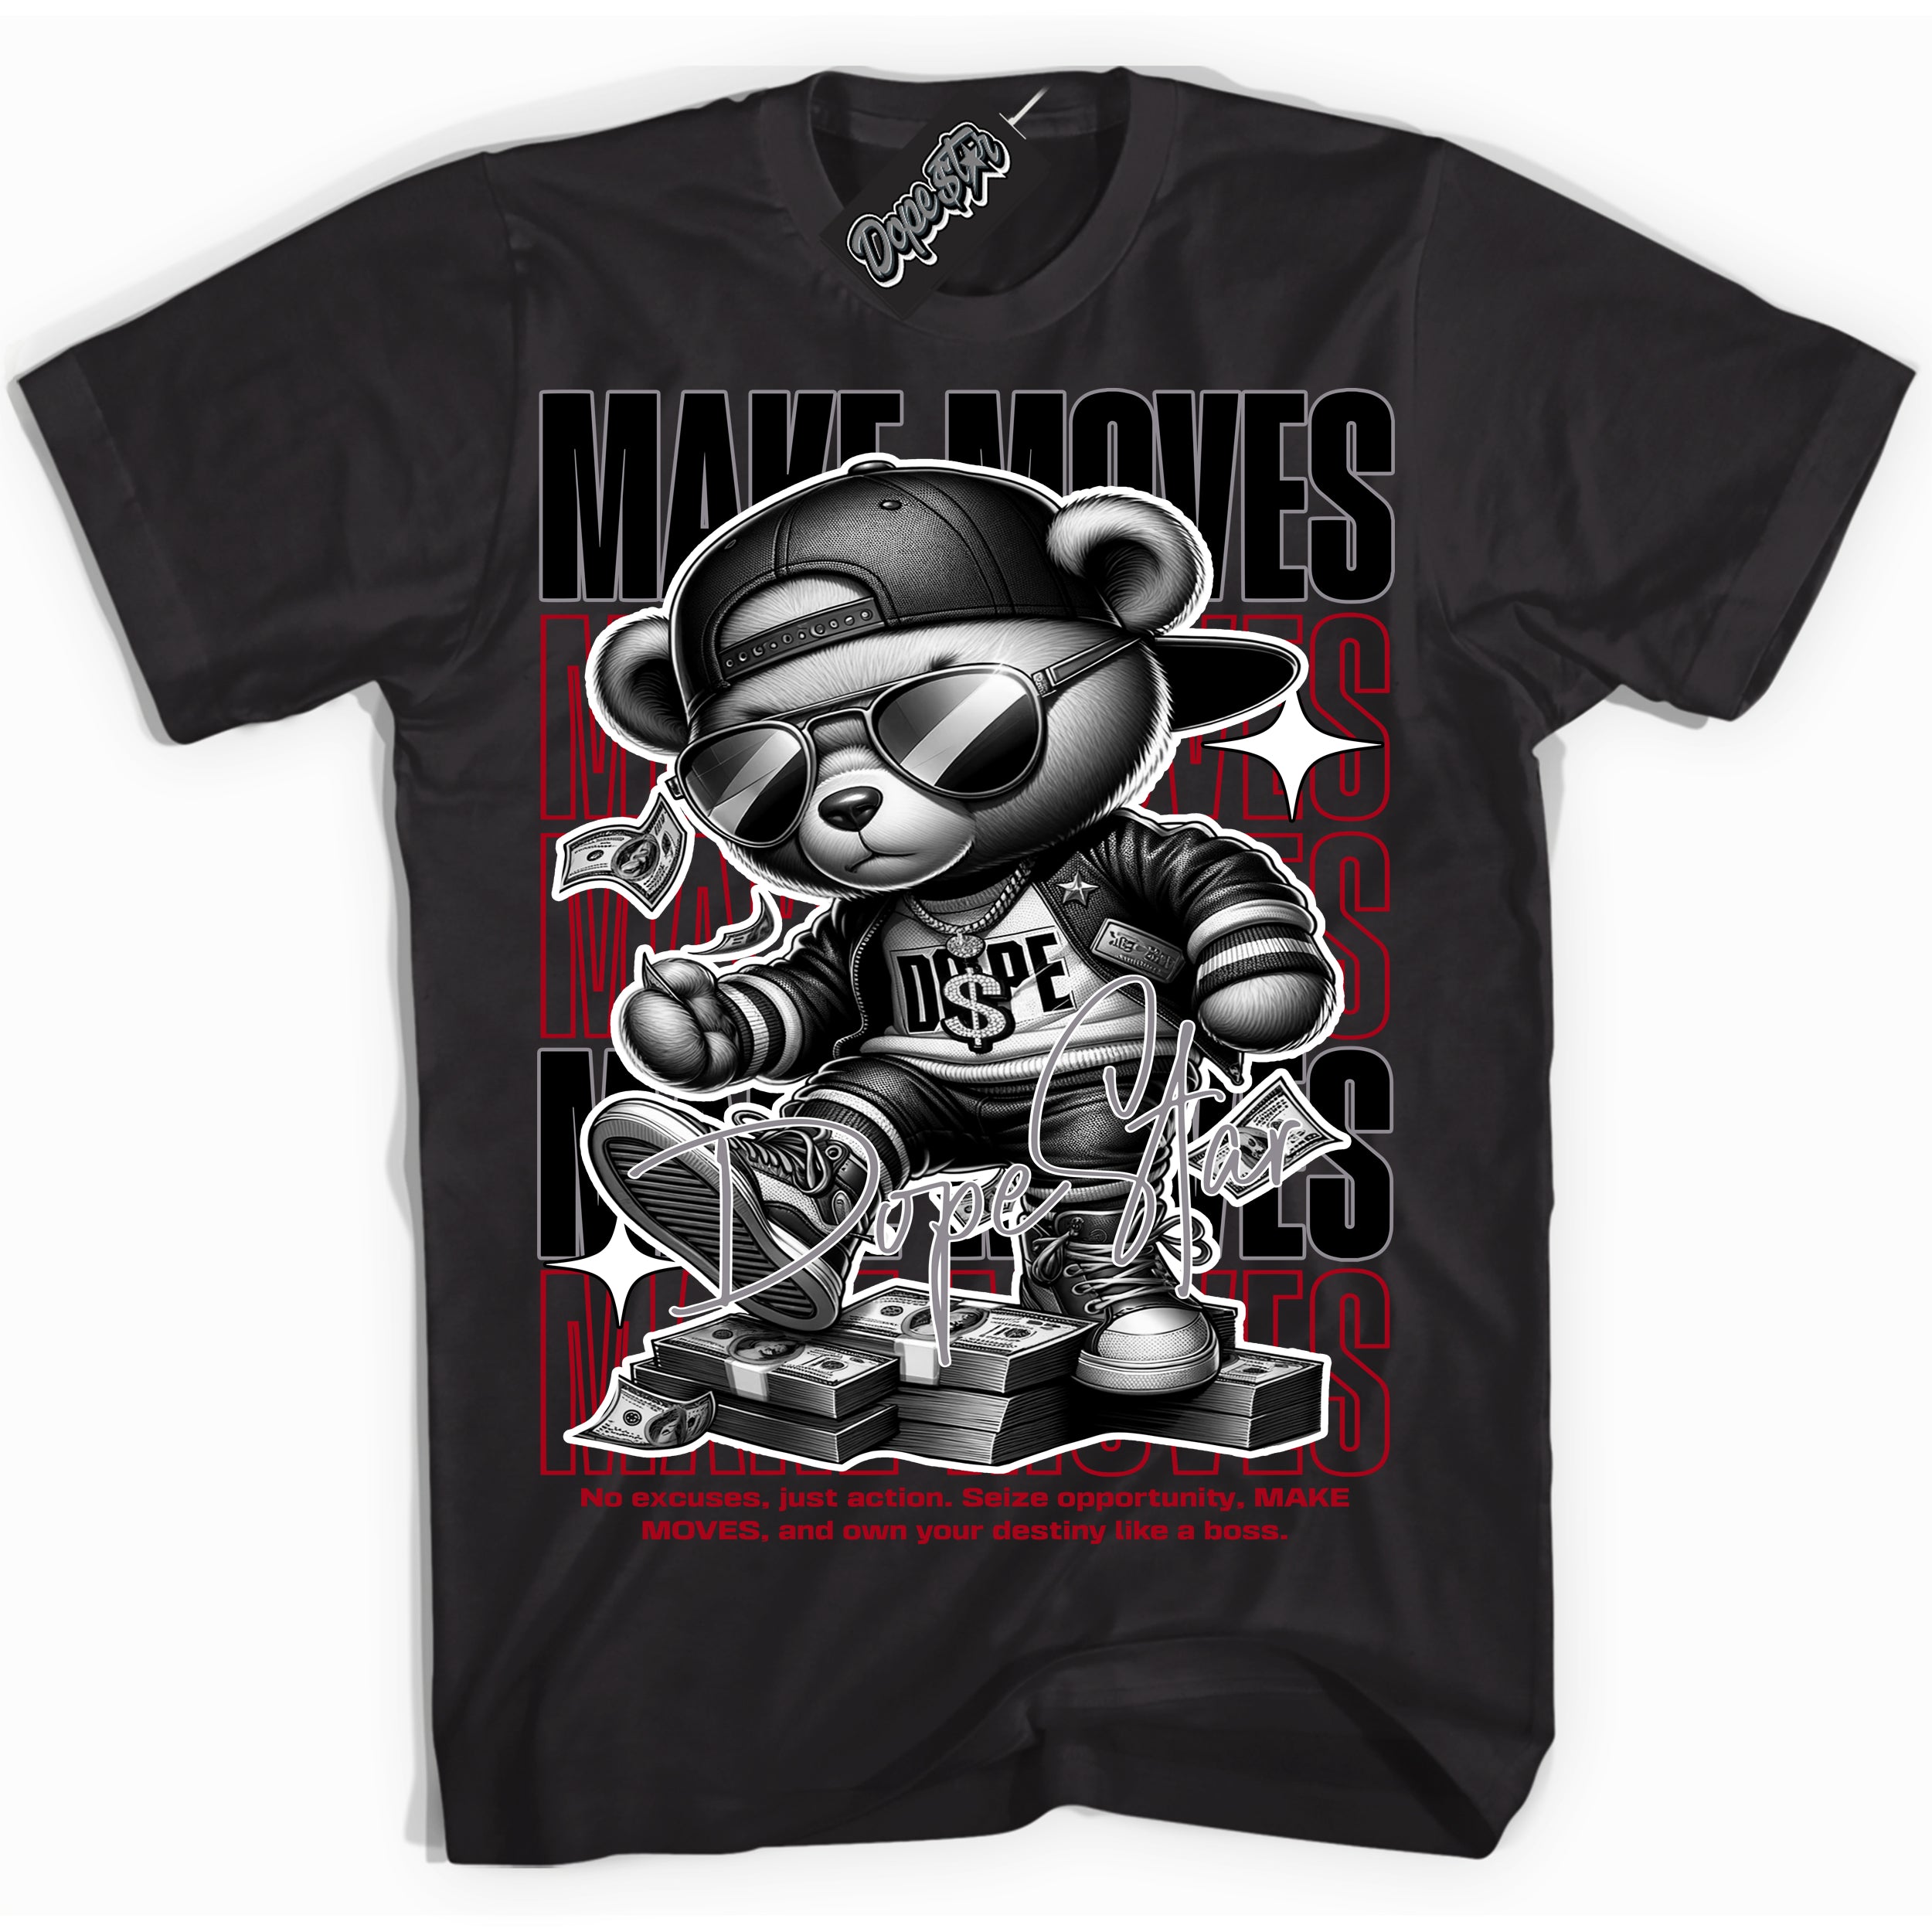 Cool Black Shirt with “ Makin Moves” design that perfectly matches Bred Reimagined 4s Sneakers.